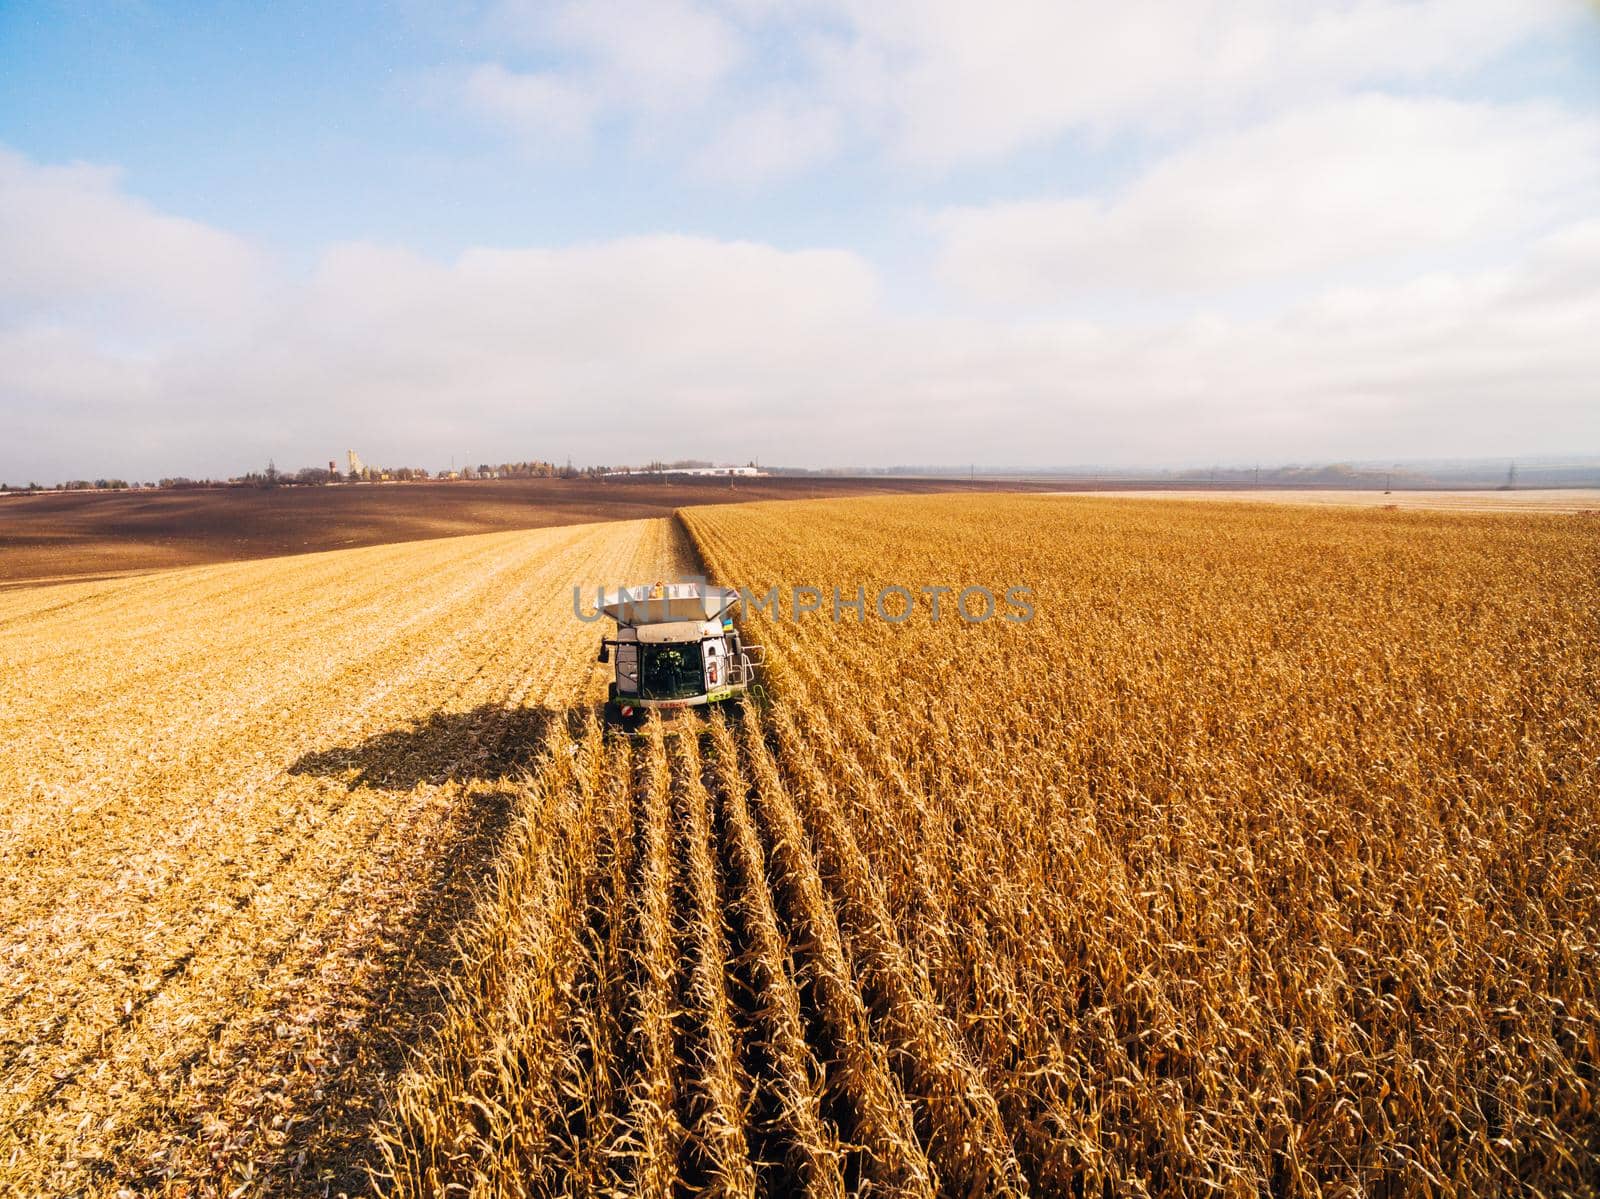 Harvesting Corn in the Green Field. Aerial photography over Automated Combines